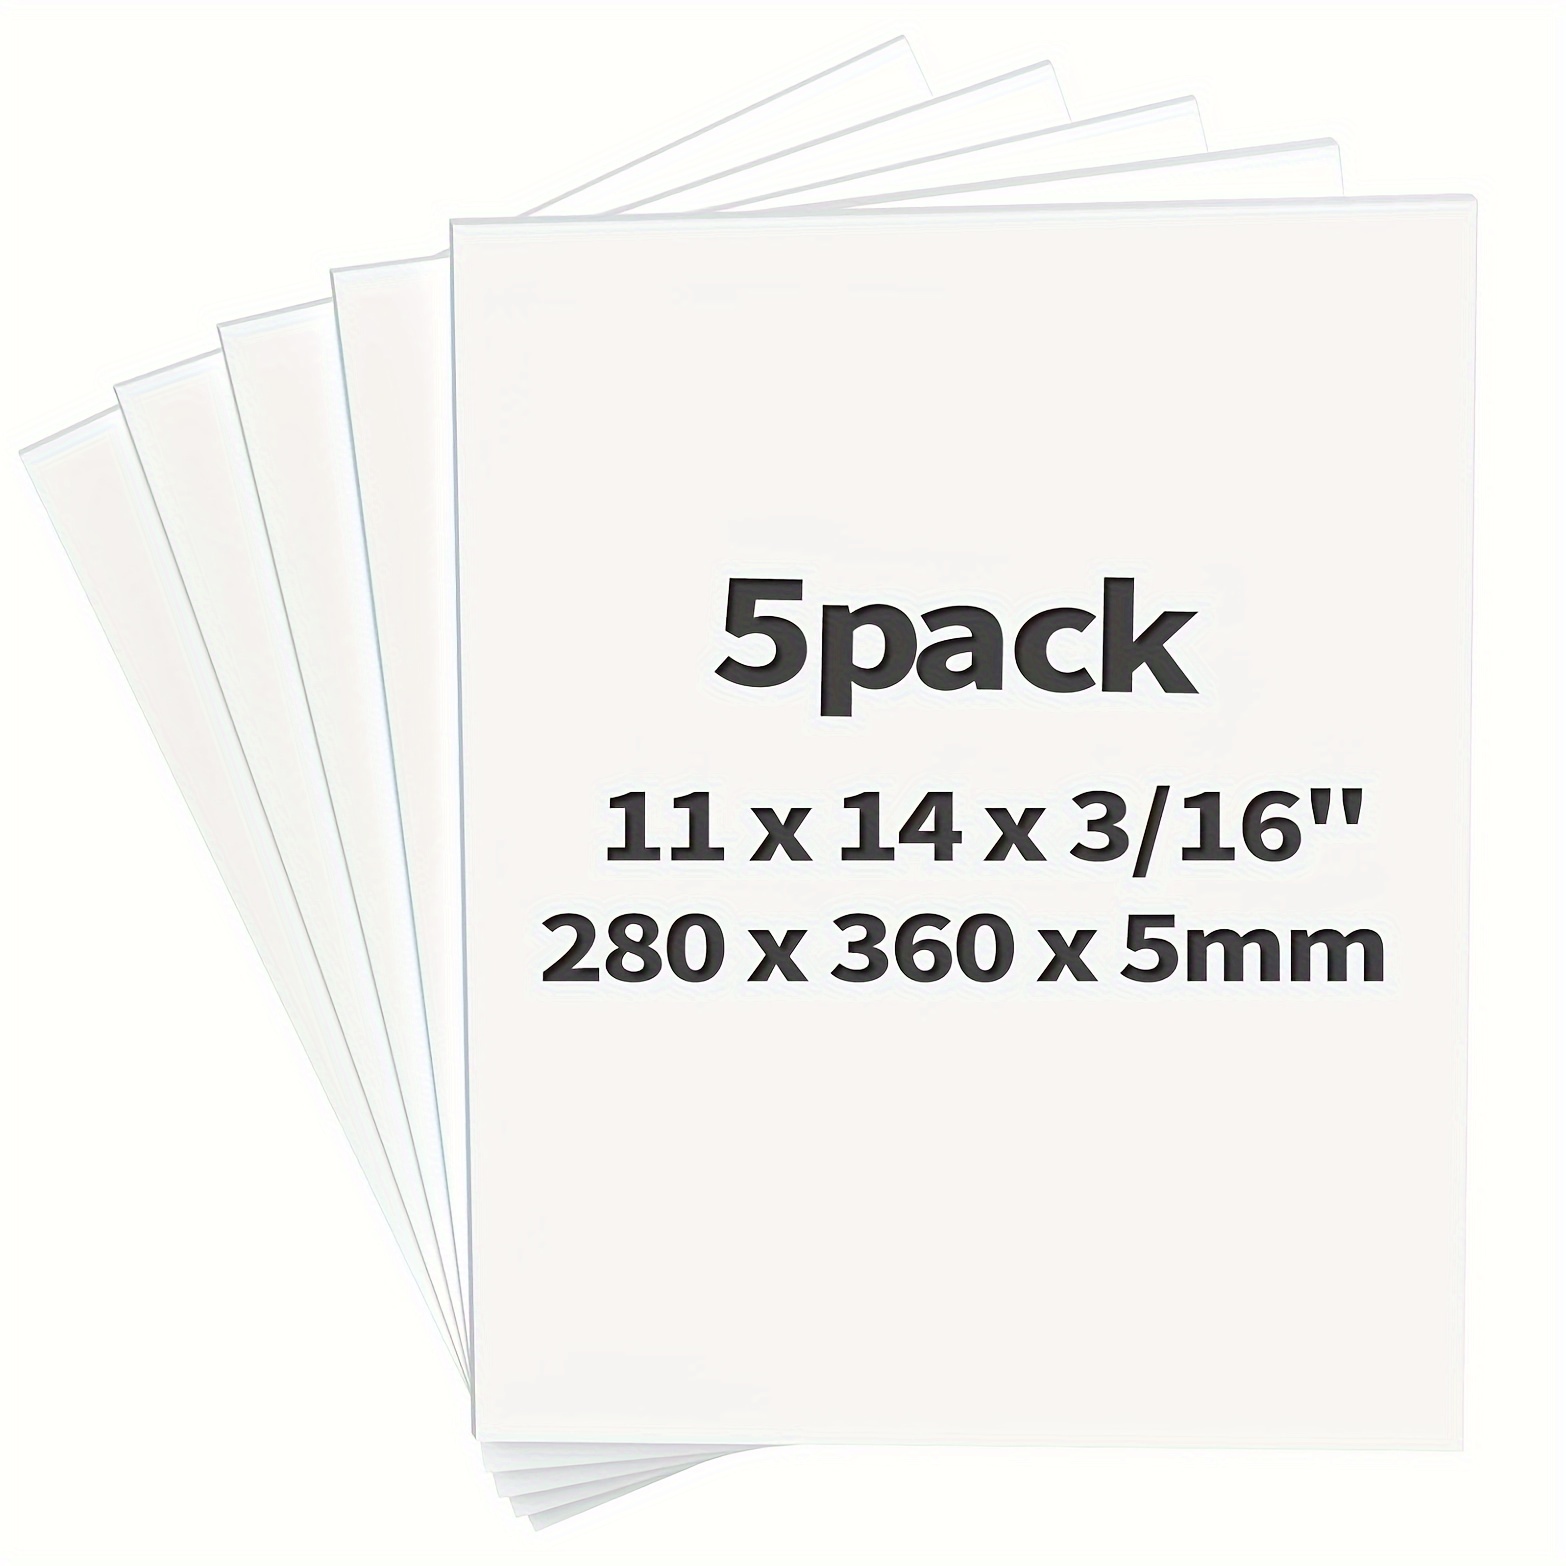 

Carpro Foam Board 5 Pack - 11x14 Inch White Foam Core Panels, 3/16" Thick For Signs, Arts, Crafts & Framing Display